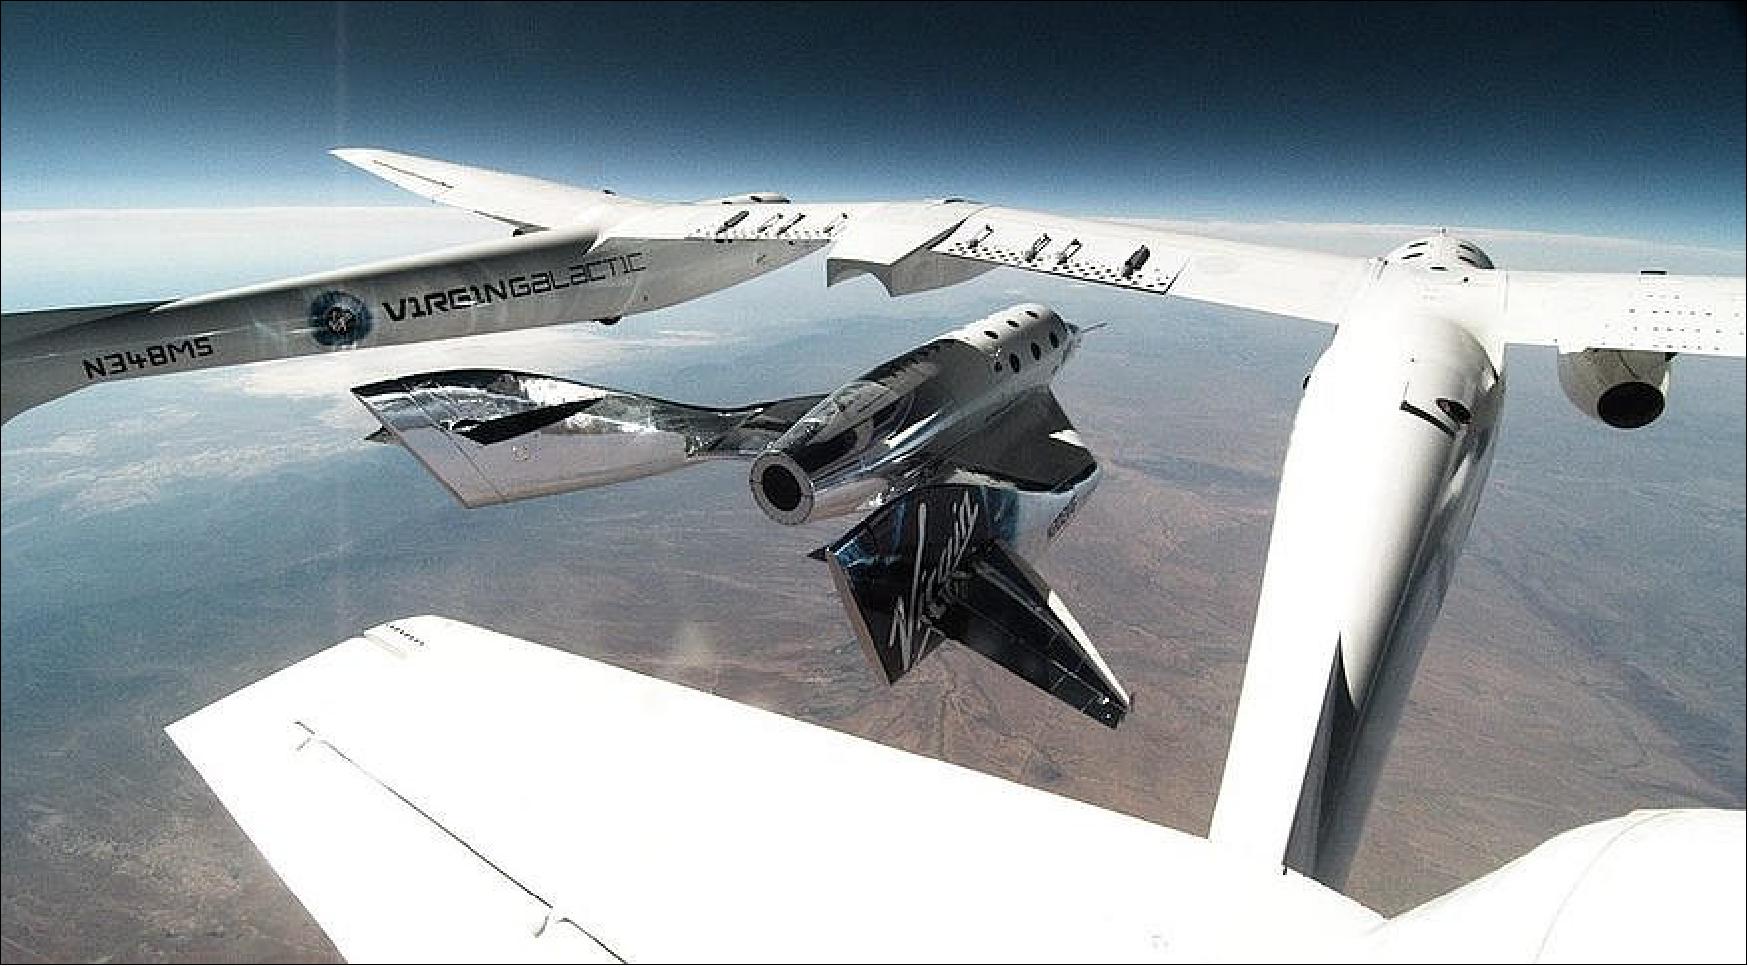 Figure 12: Virgin Galactic says the next SpaceShipTwo test flight is now scheduled for May 22 after resolving a potential maintenance issue with the WhiteKnightTwo aircraft (image credit: Virgin Galactic)